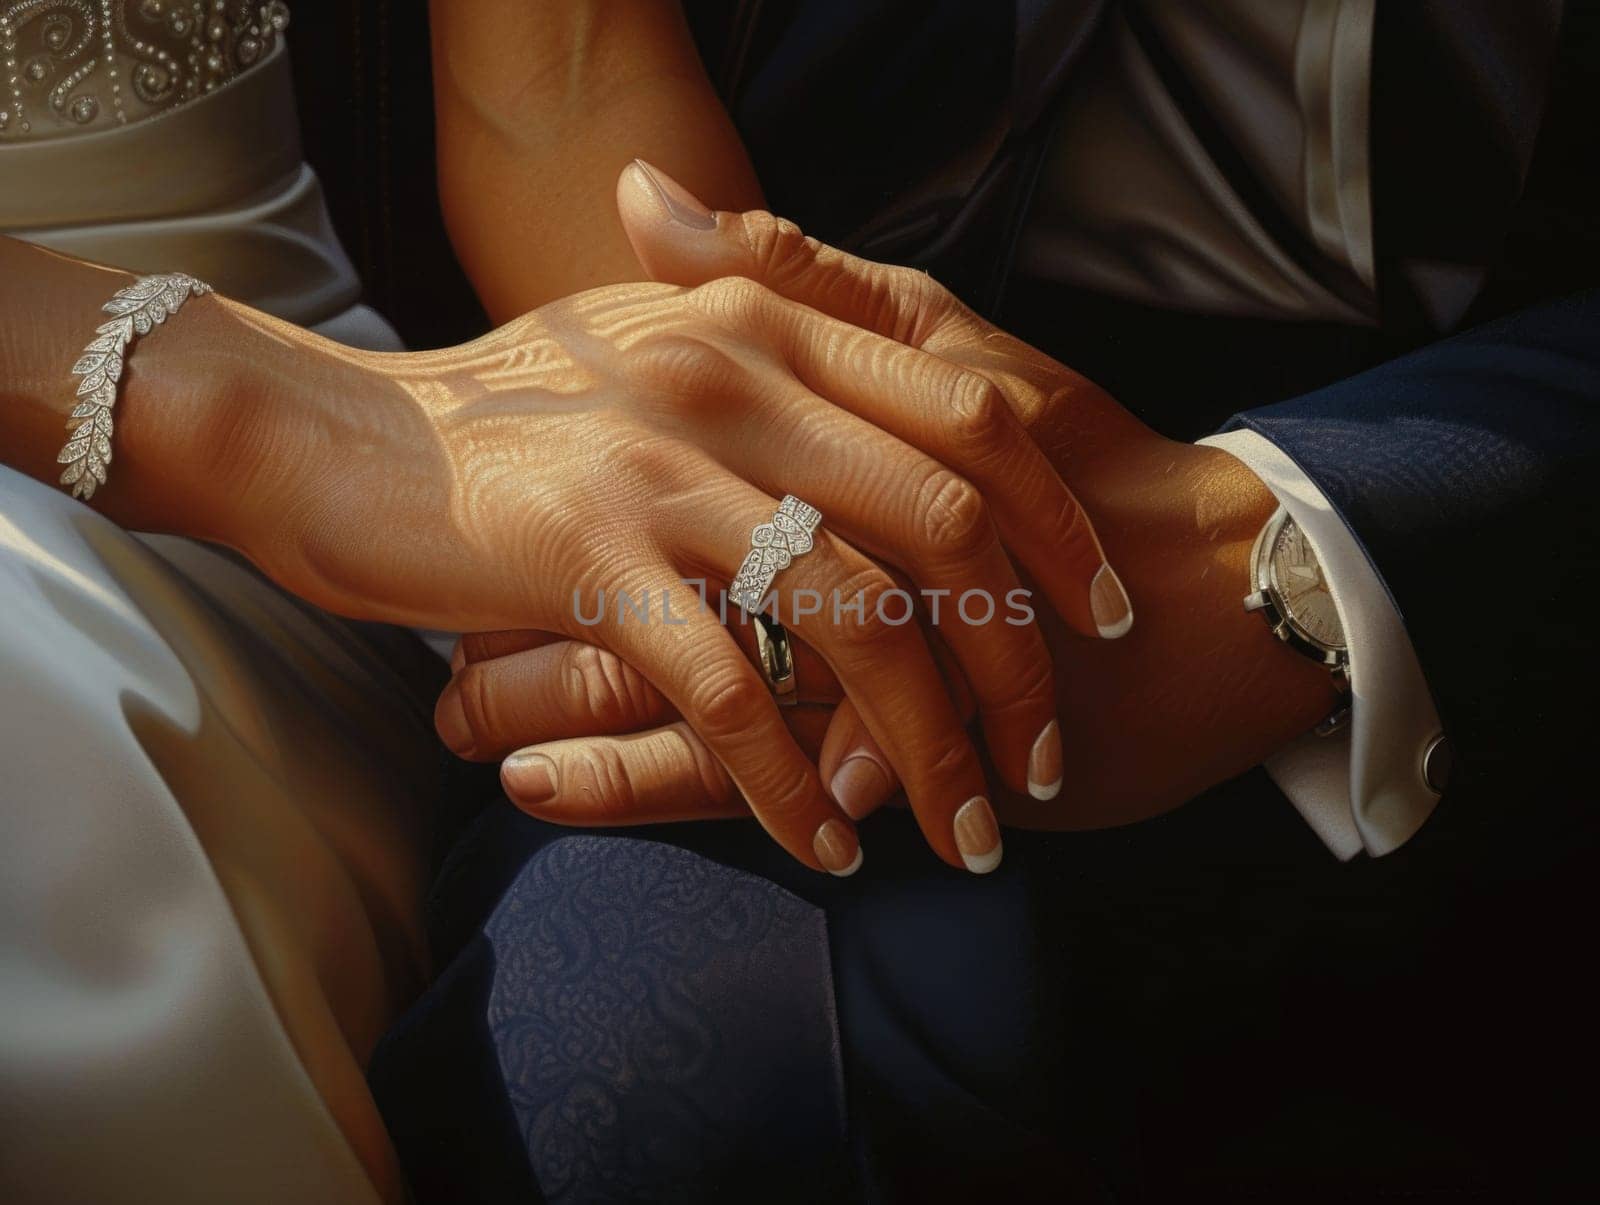 A realistic painting of two lovers sitting in a taxi, their hands intertwined as they share a sweet moment.